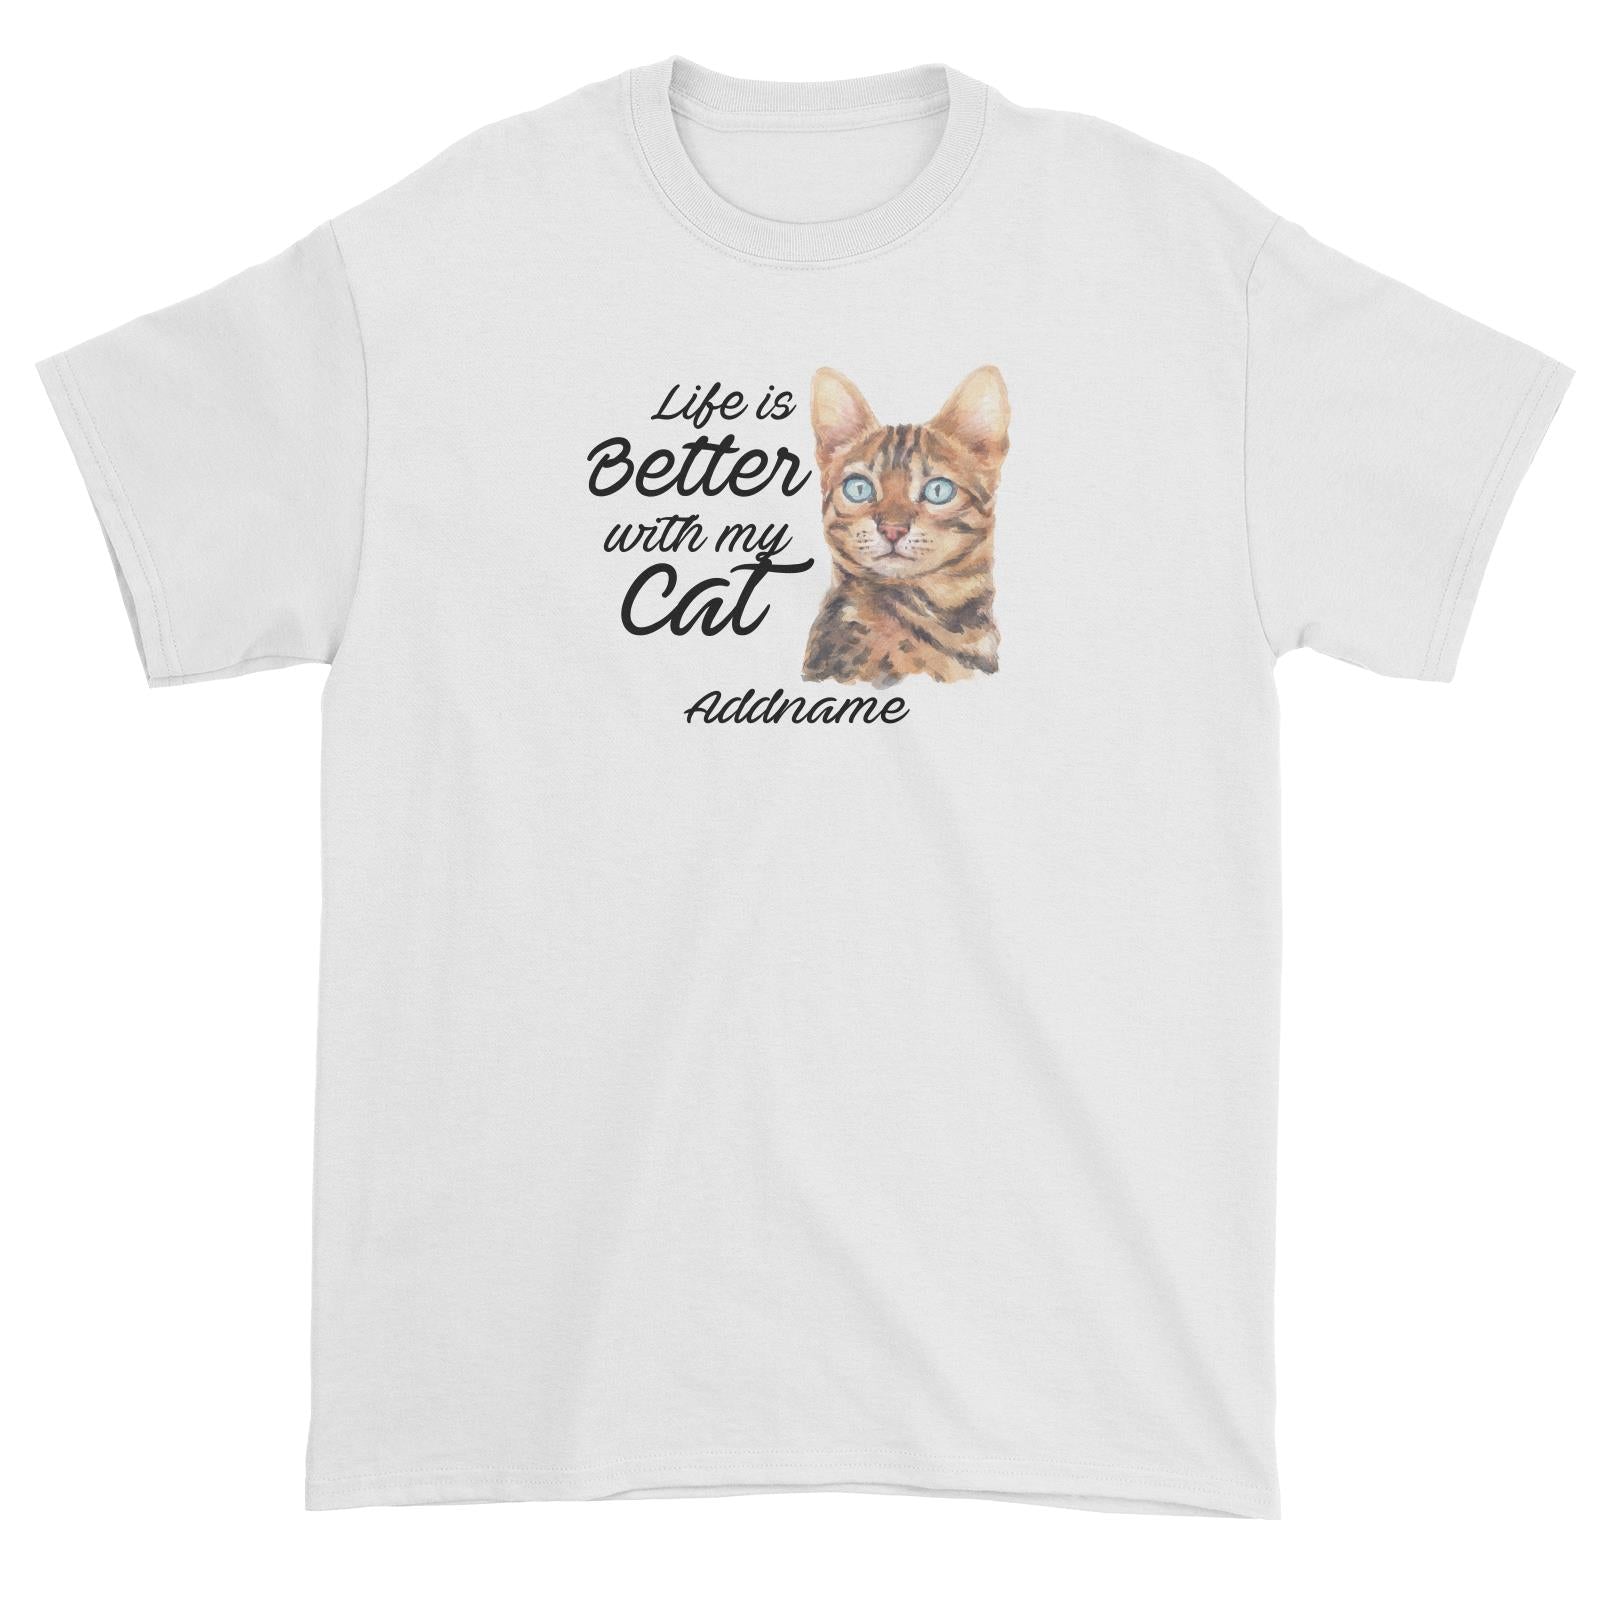 Watercolor Life is Better With My Cat Bengal Addname Unisex T-Shirt